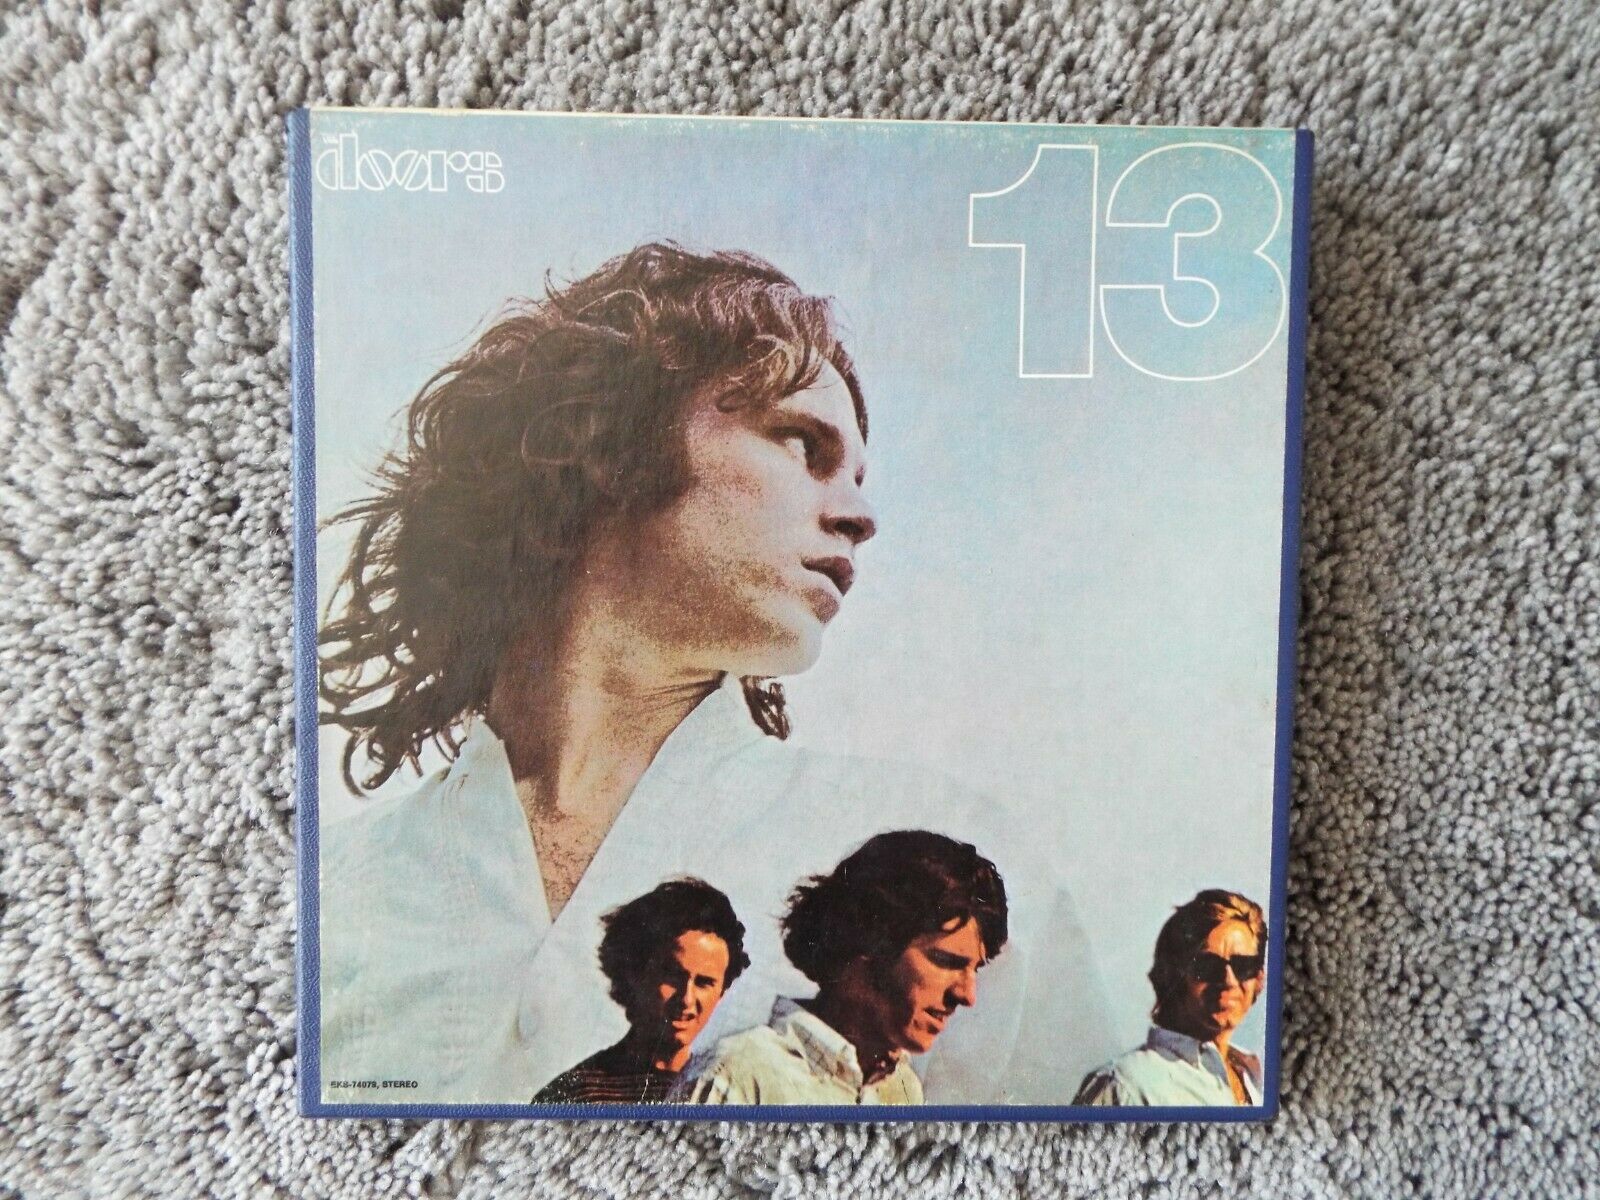  RARE-THE DOORS-JIM MORRISON-13-REEL TO REEL TAPE 4 TRACK 7 1/2  IPS STEREO-AMPEX - auction details